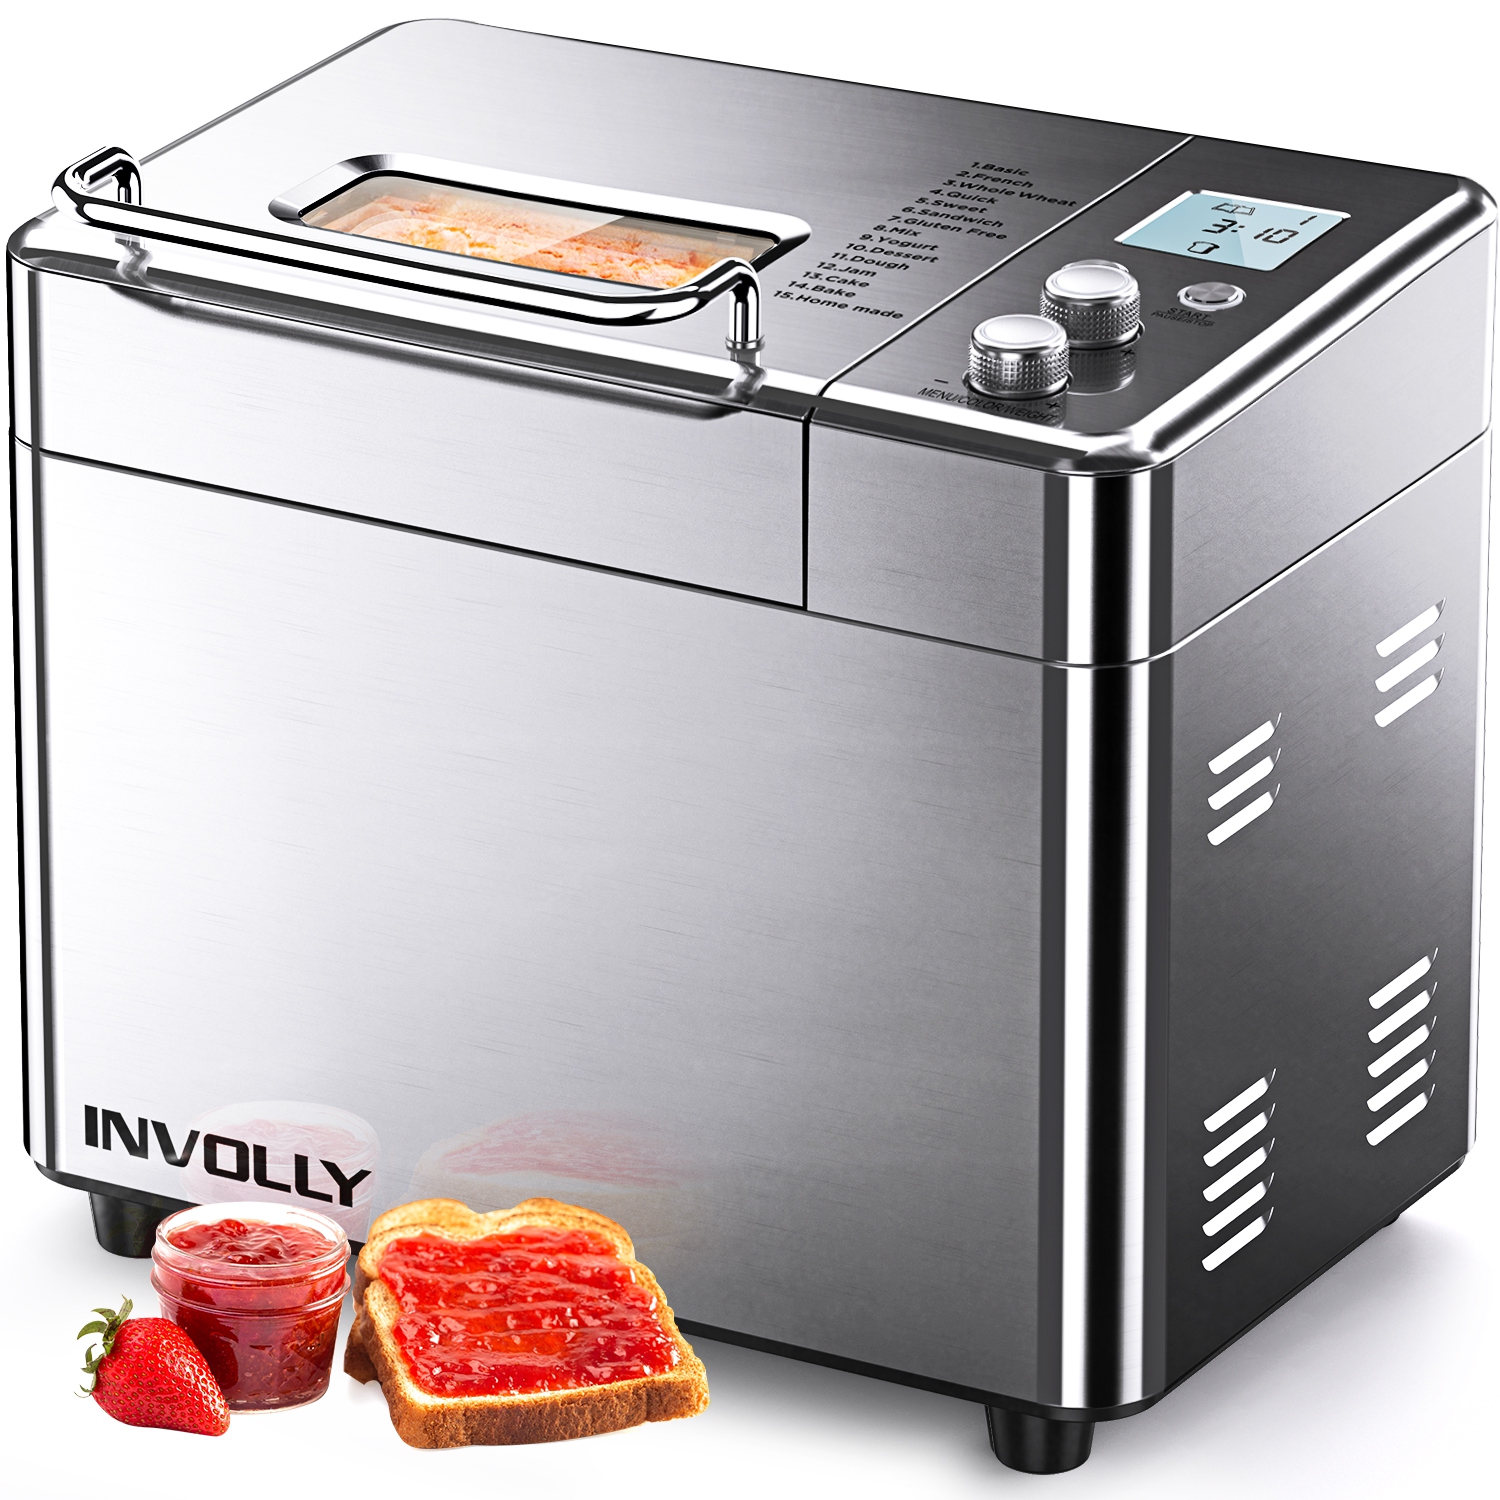 INVOLLY Bread Machine, 2.2LB Large 600W Dual Heaters Bread Maker Machine, 15-in-1 Toaster Maker w/Auto Fruit Nut Dispenser, LCD Display, Nonstick Pan, Programmable, 15H Timer